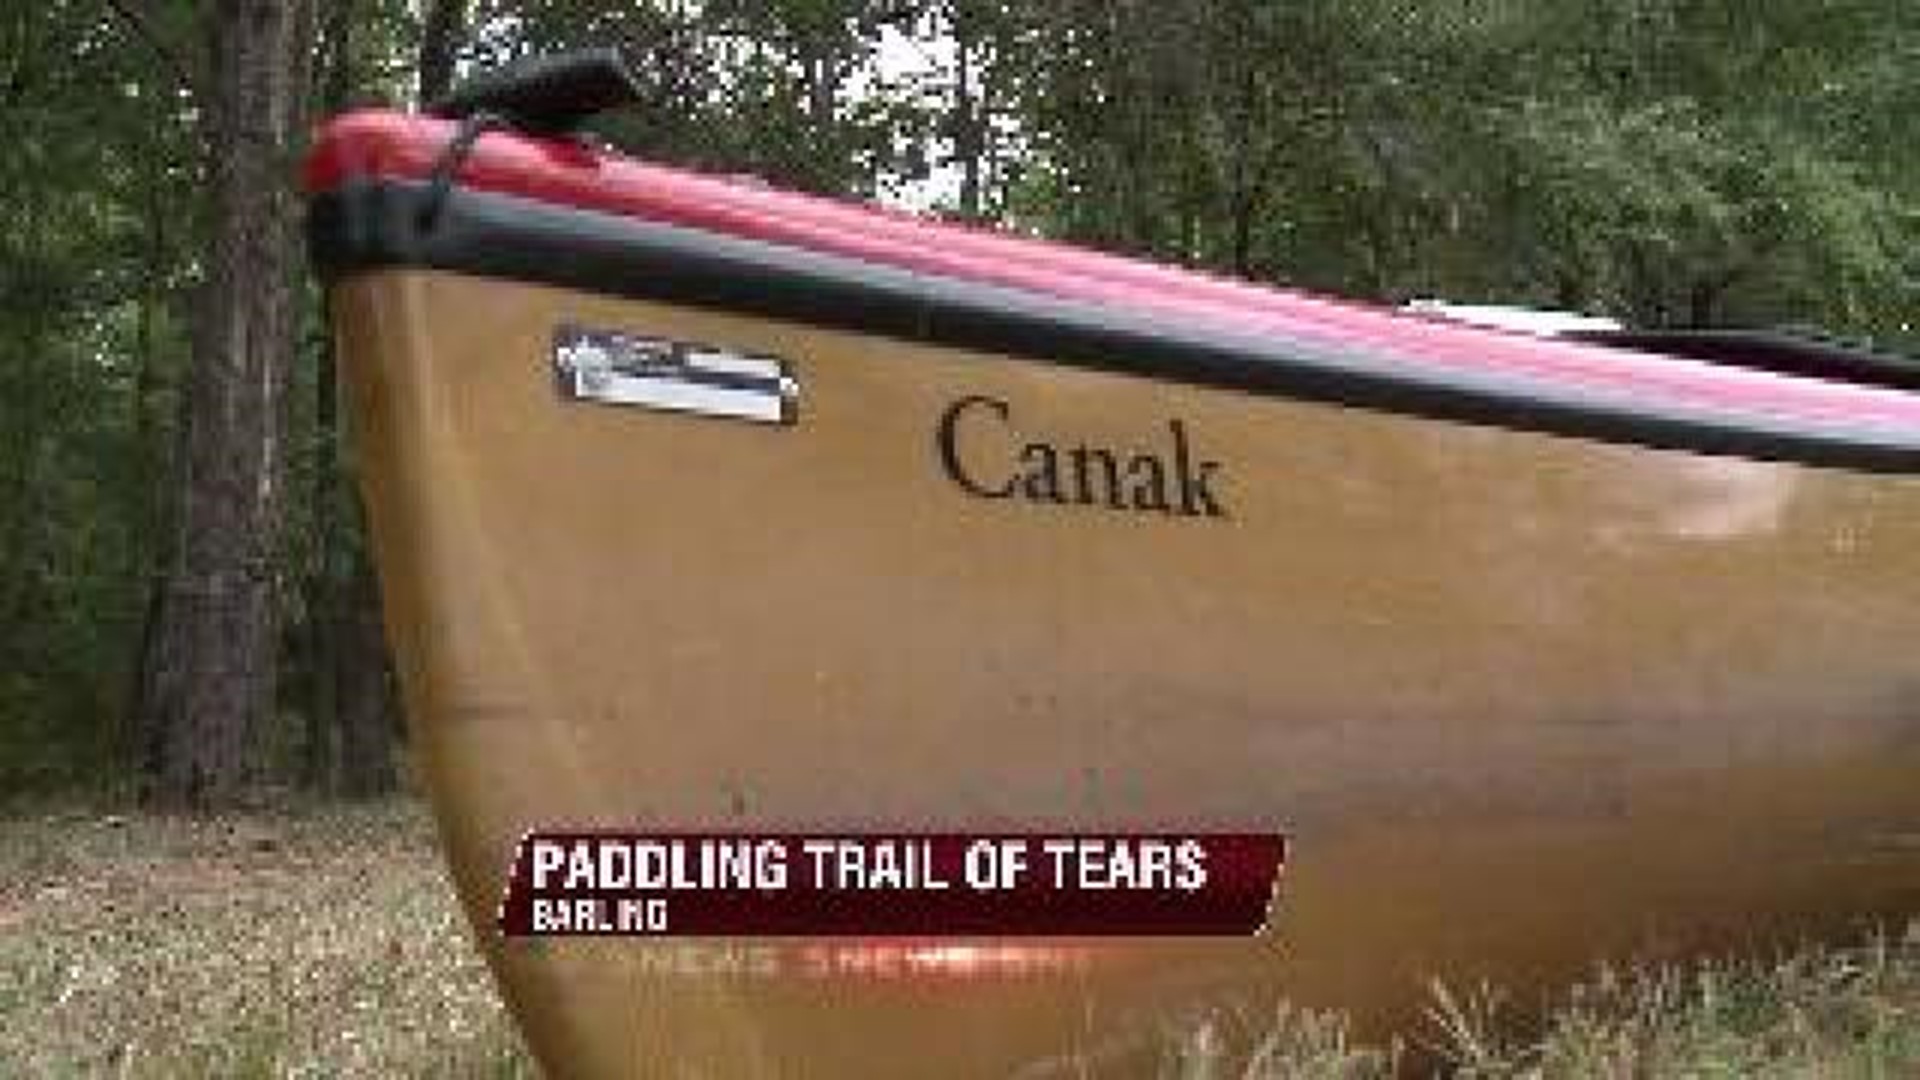 Dale Stewart is kayaking along the water route of the Trail of Tears